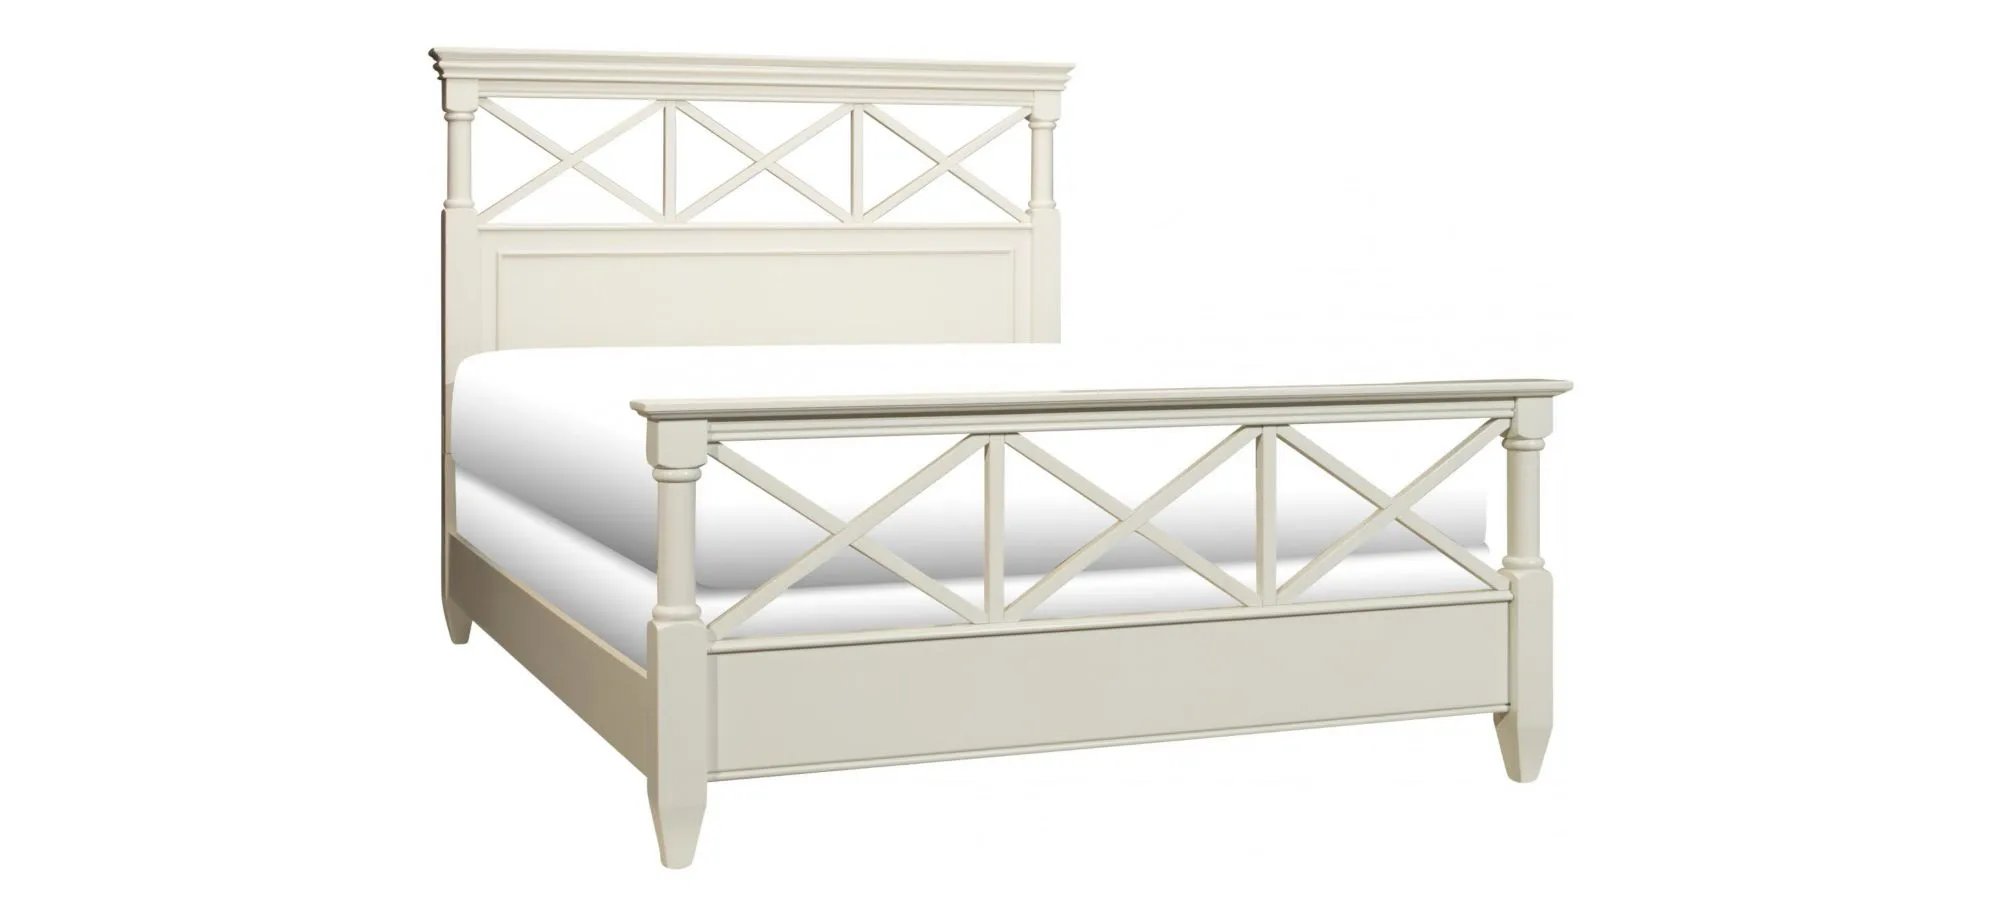 Retreat Panel Bed in Ivory by Magnussen Home